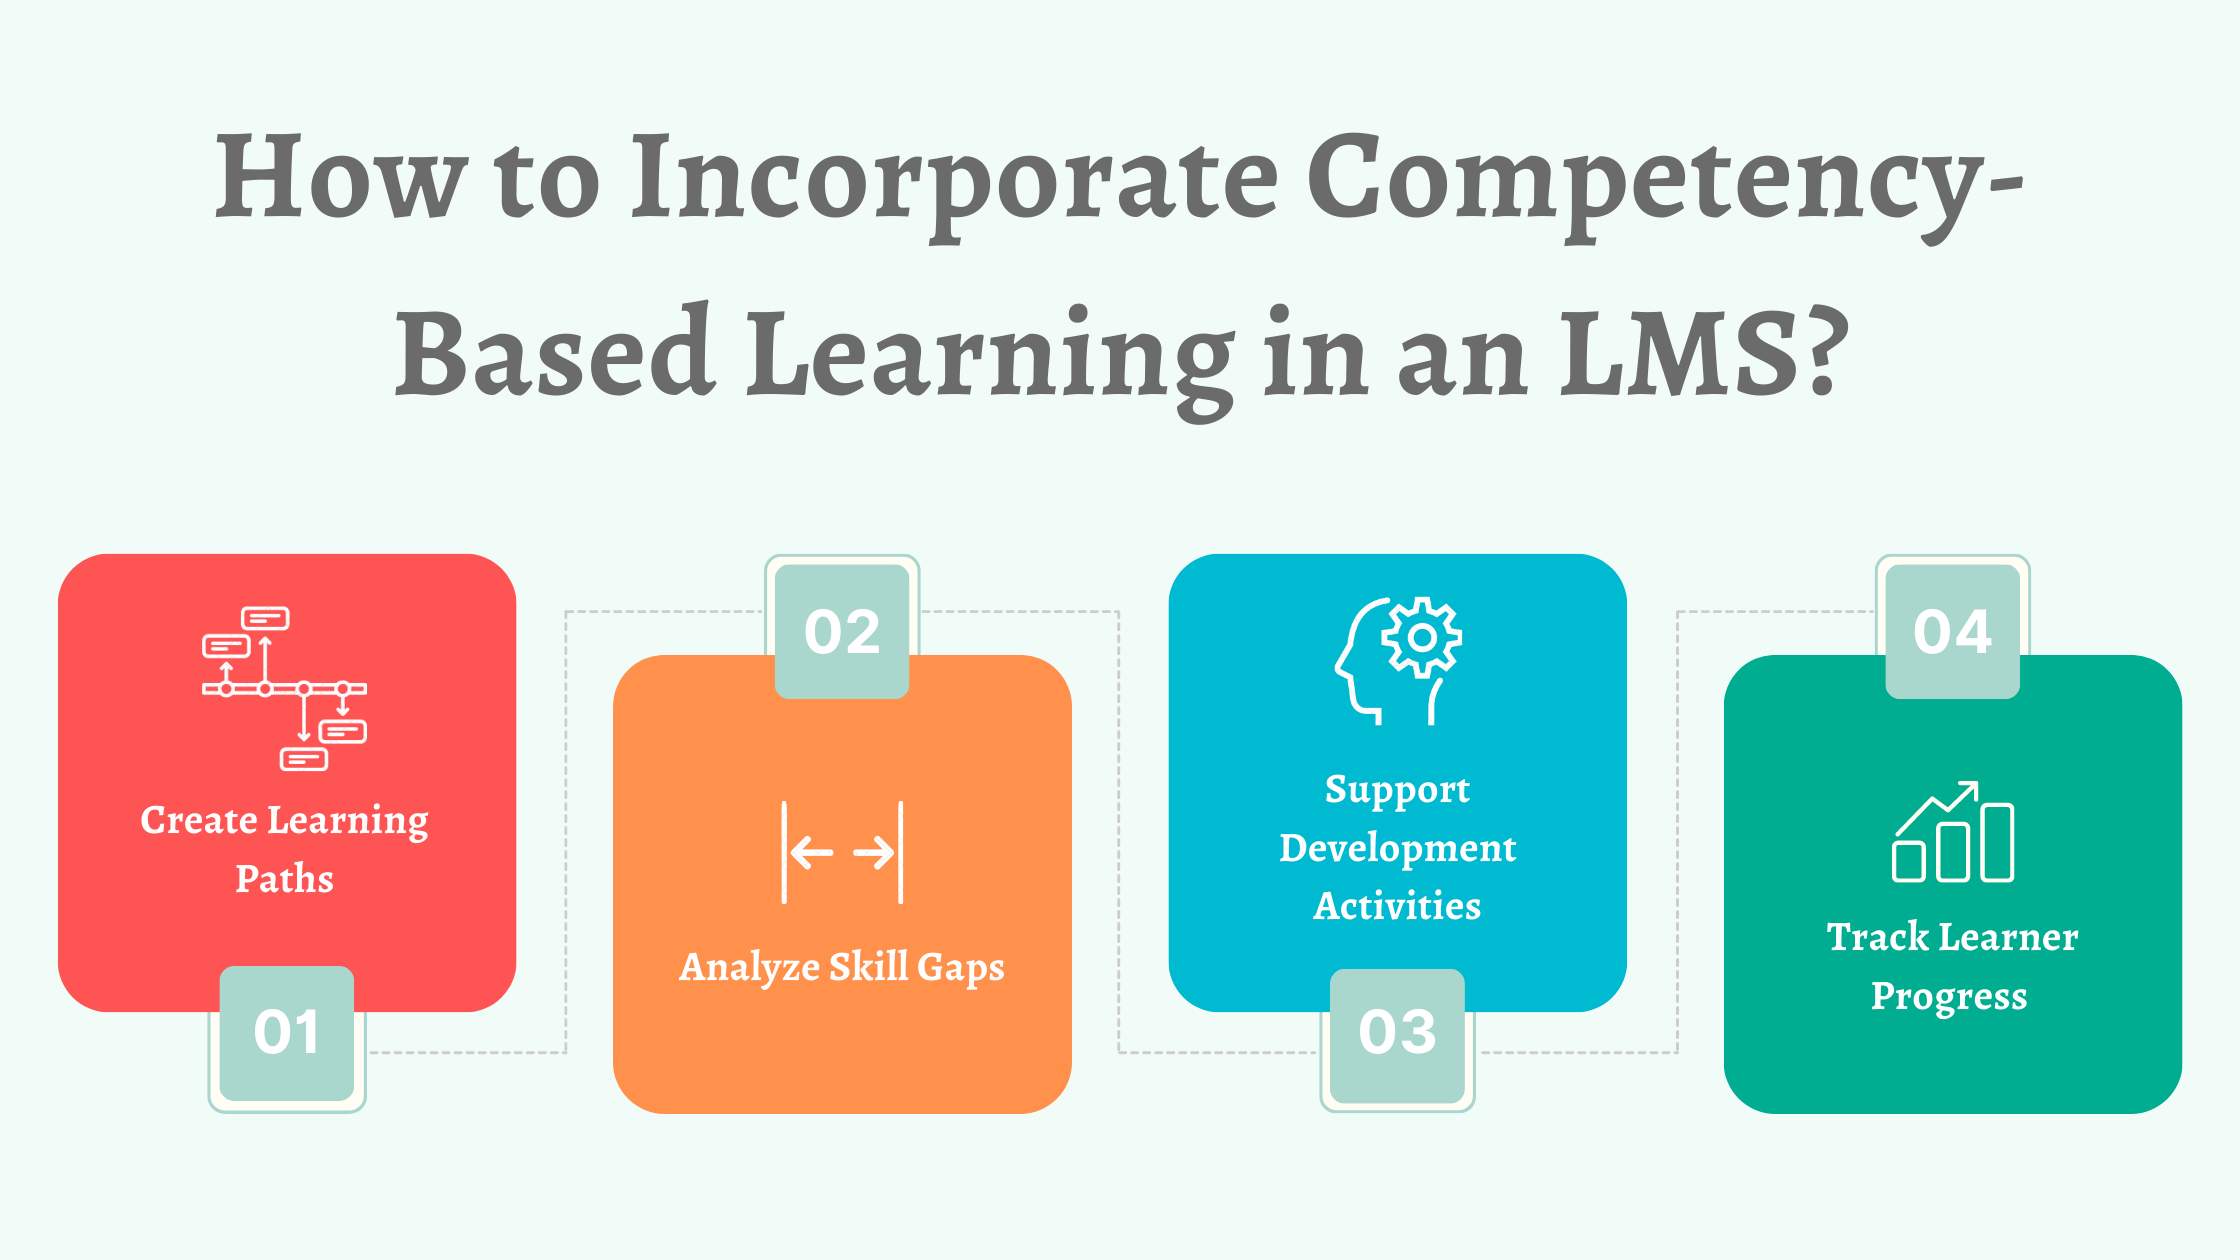 Use competency-based learning for SMART learning objectives